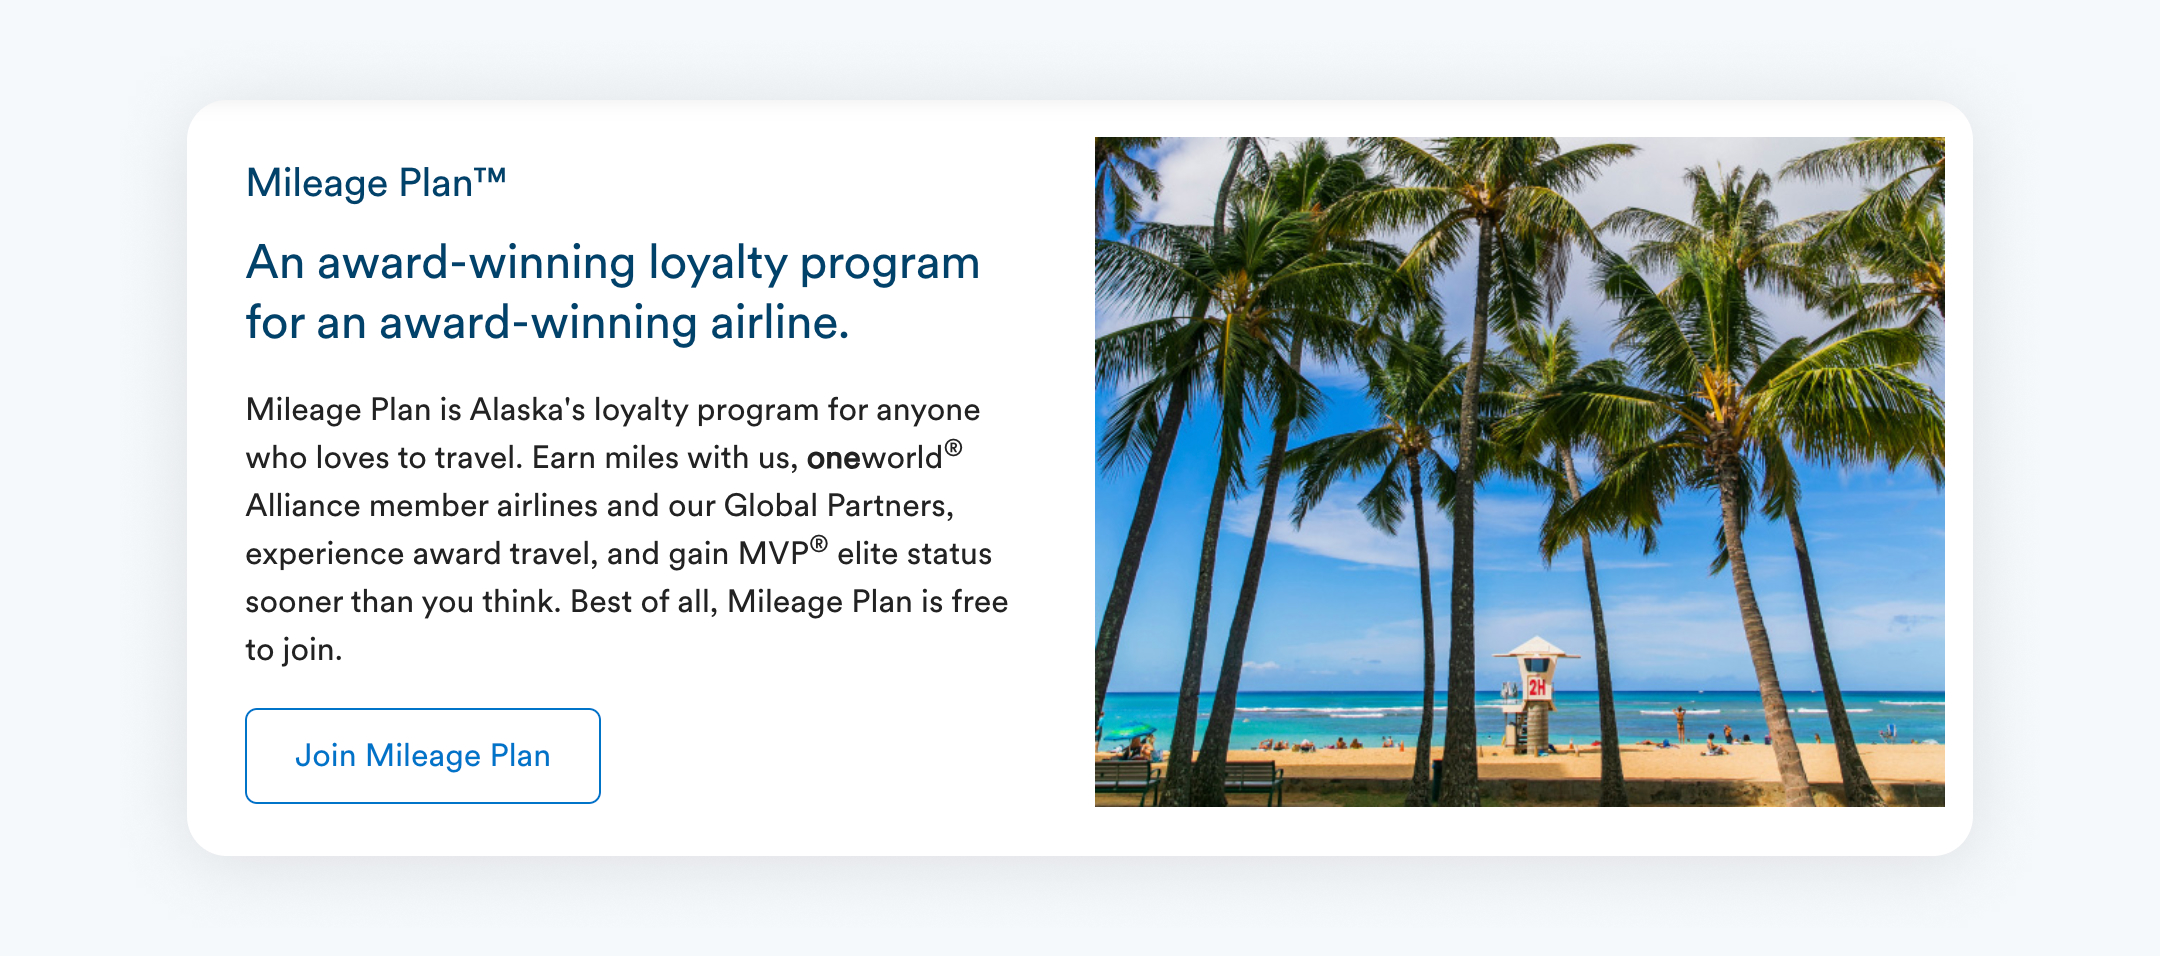 A promotional image for Alaska Airlines' Mileage Plan, showing a picturesque beach with palm trees and a clear sky. Accompanying text invites viewers to join the loyalty program, emphasizing the perks of travel and MVP elite status, indicative of the benefits offered through text subscription services.